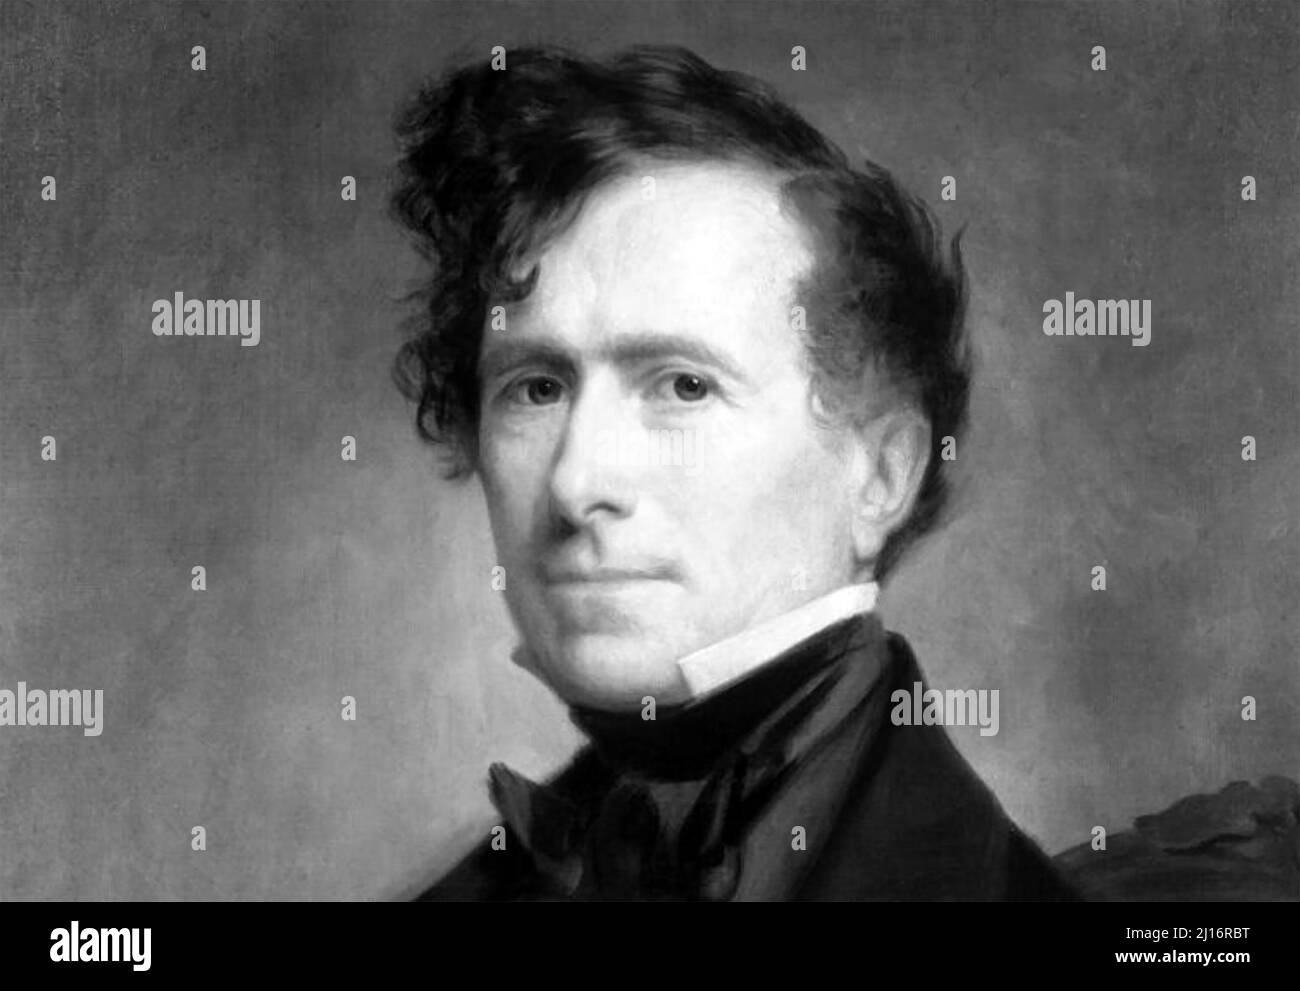 FRANKLIN PIERCE (18-04-1869) 14th President of the United States, about 1860 Stock Photo